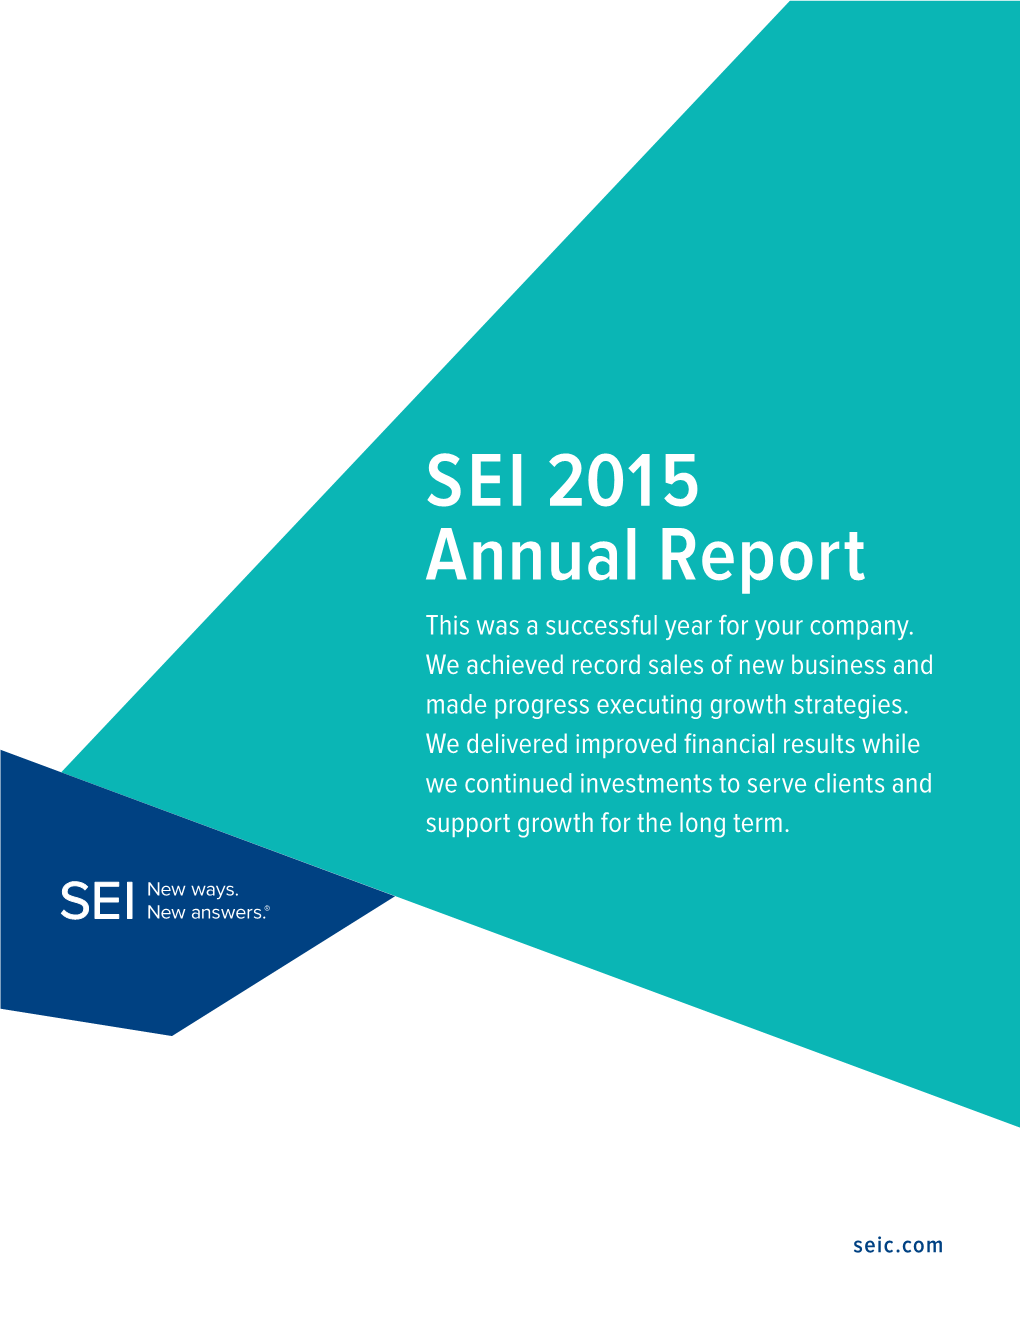 SEI 2015 Annual Report This Was a Successful Year for Your Company